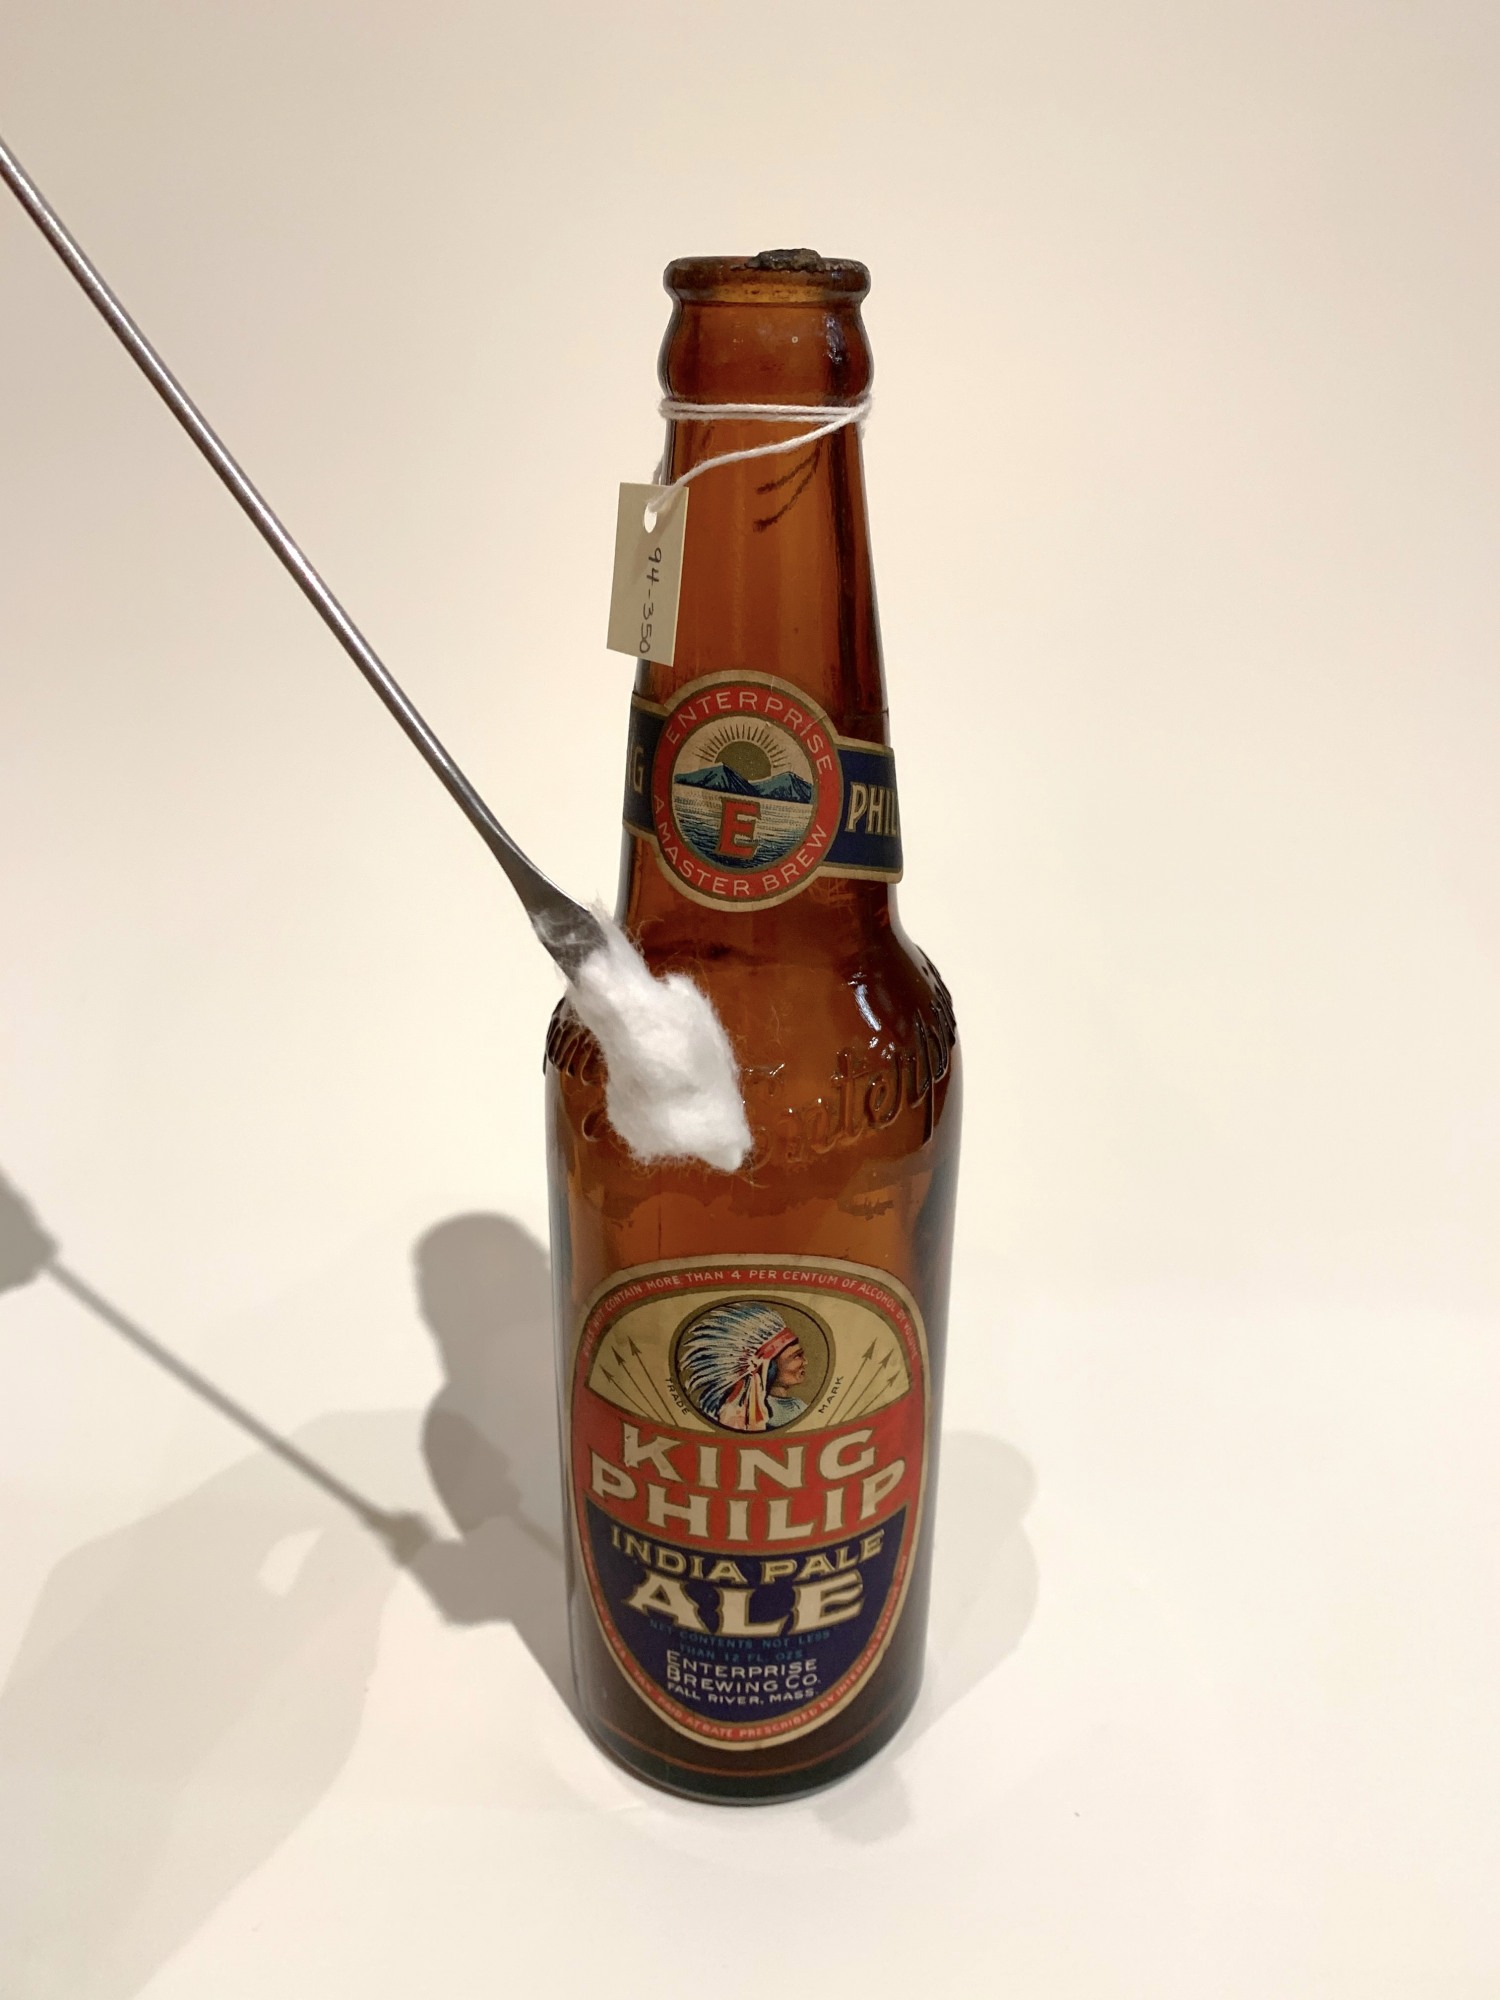 Photo of an antique glass beer bottle being cleaned with a cotton q-tip.